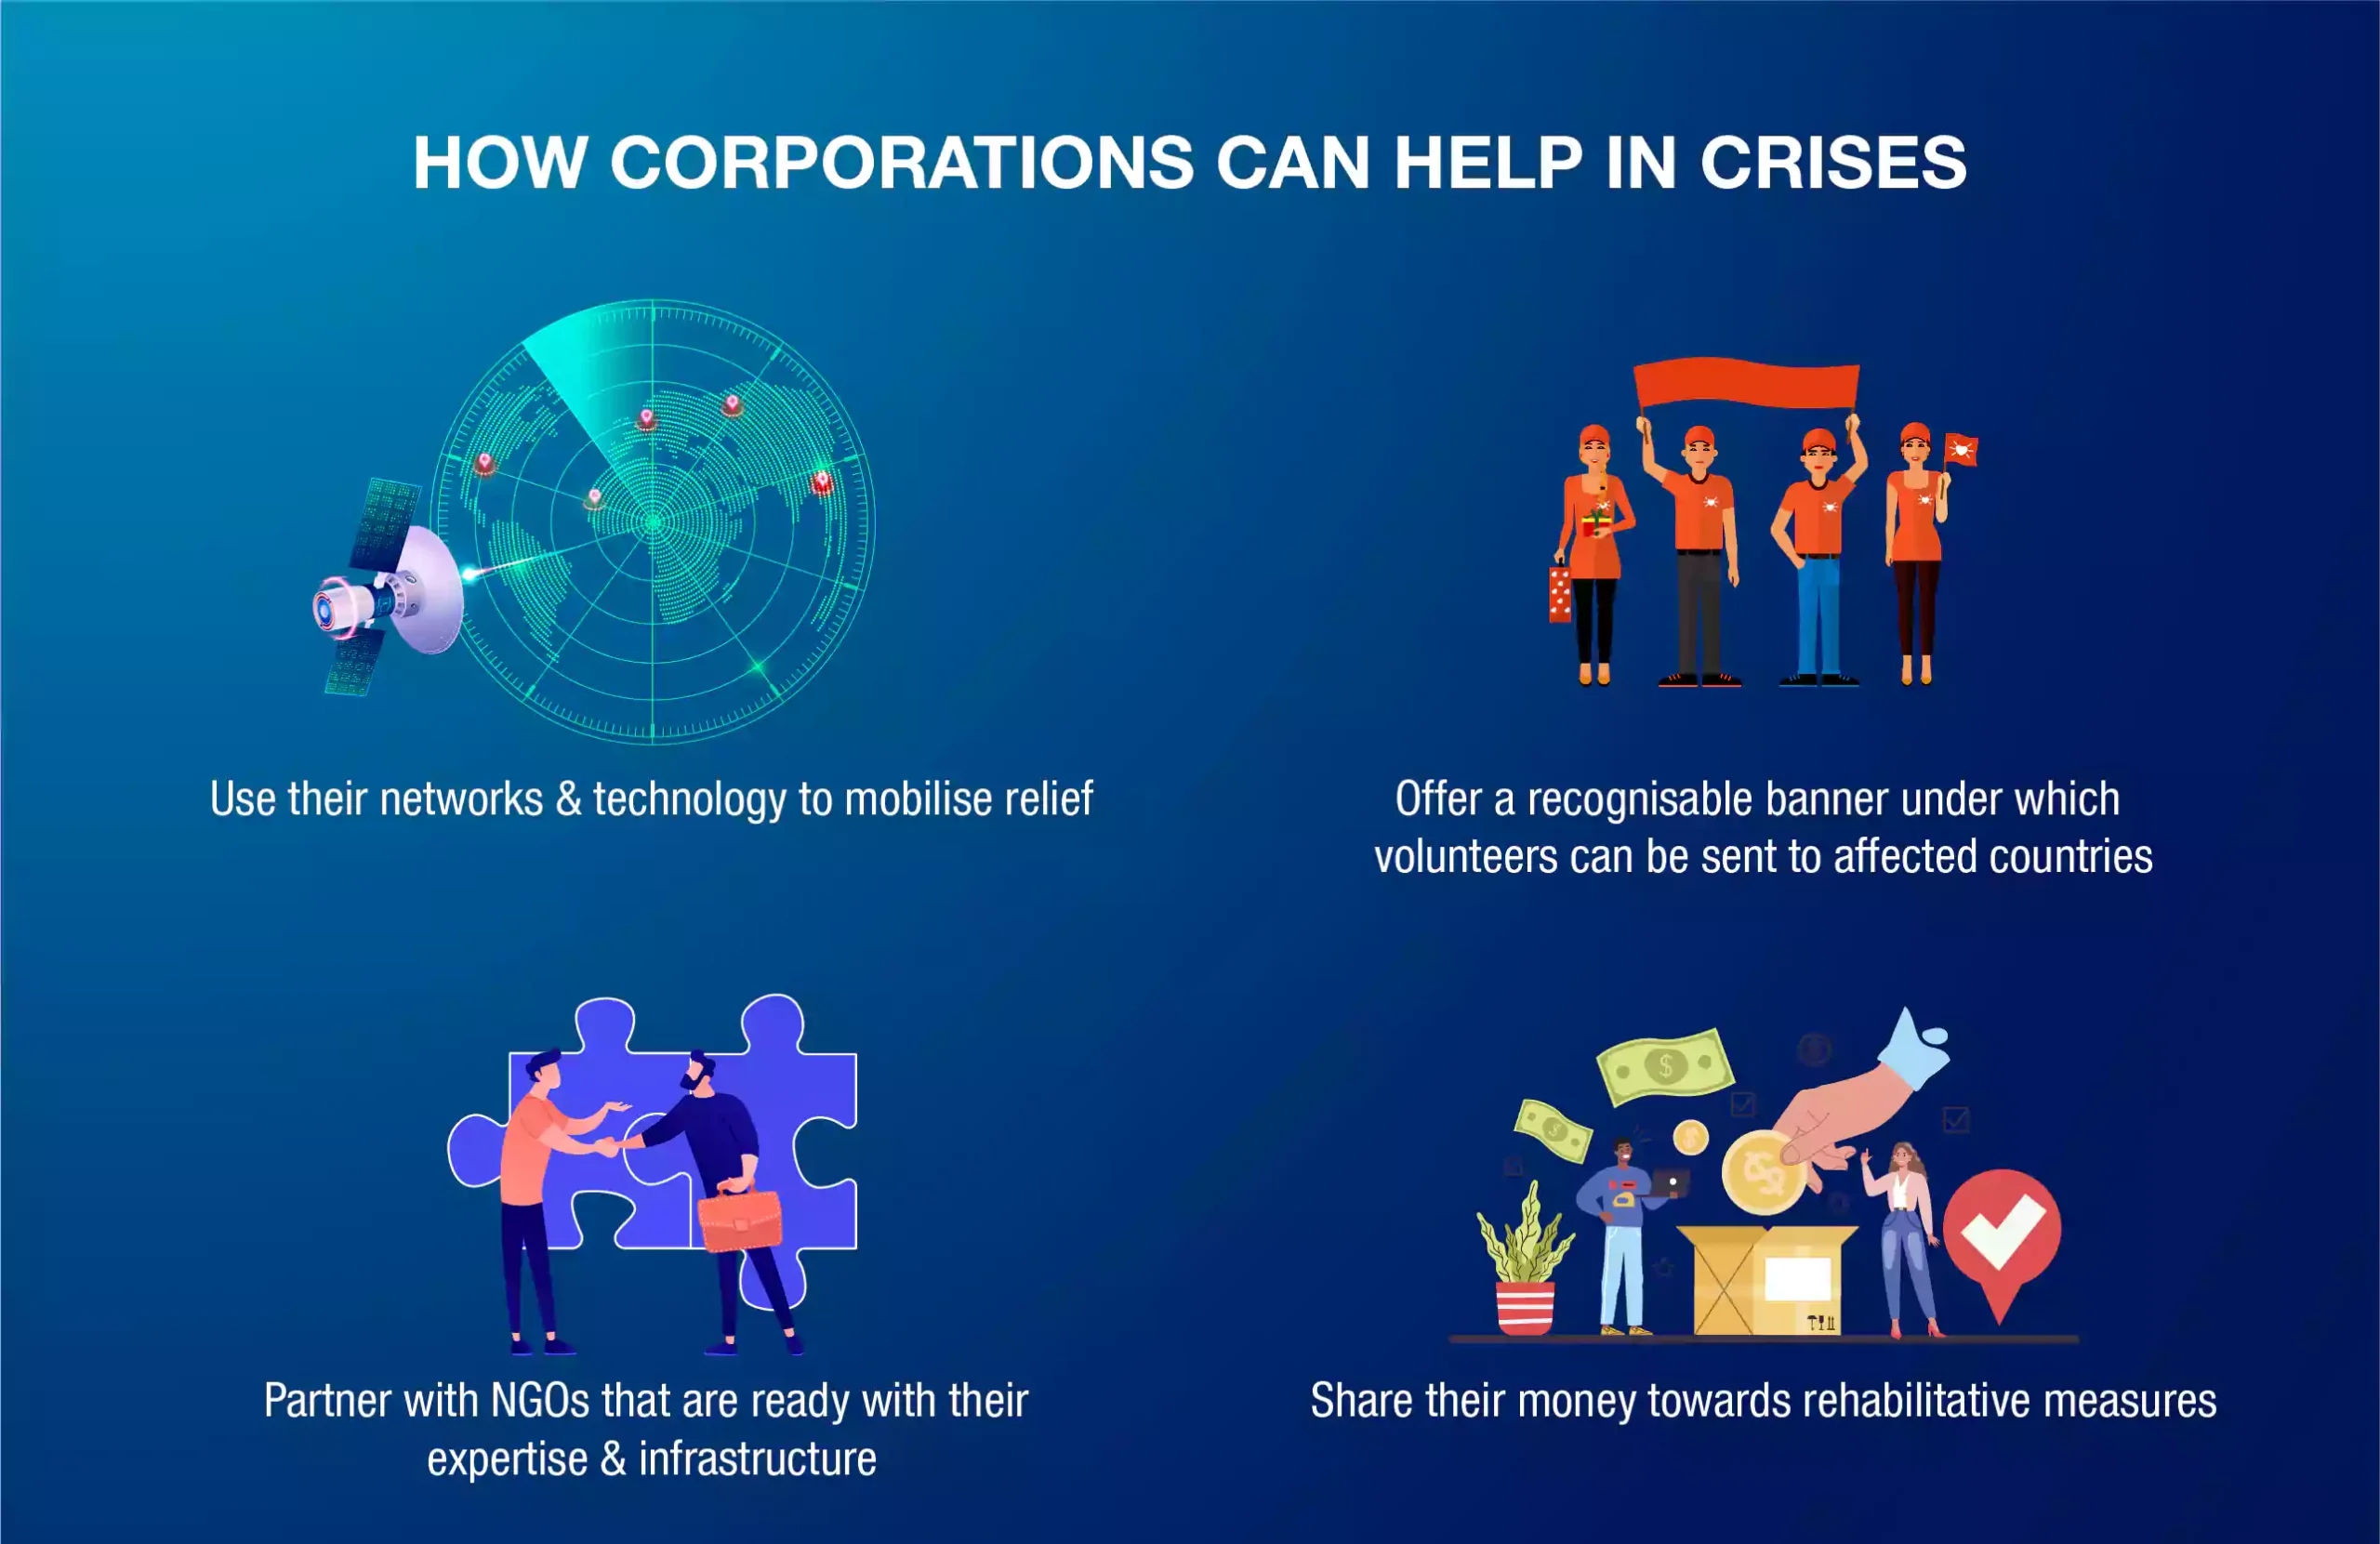 The corporate response: How corporations can help in crises